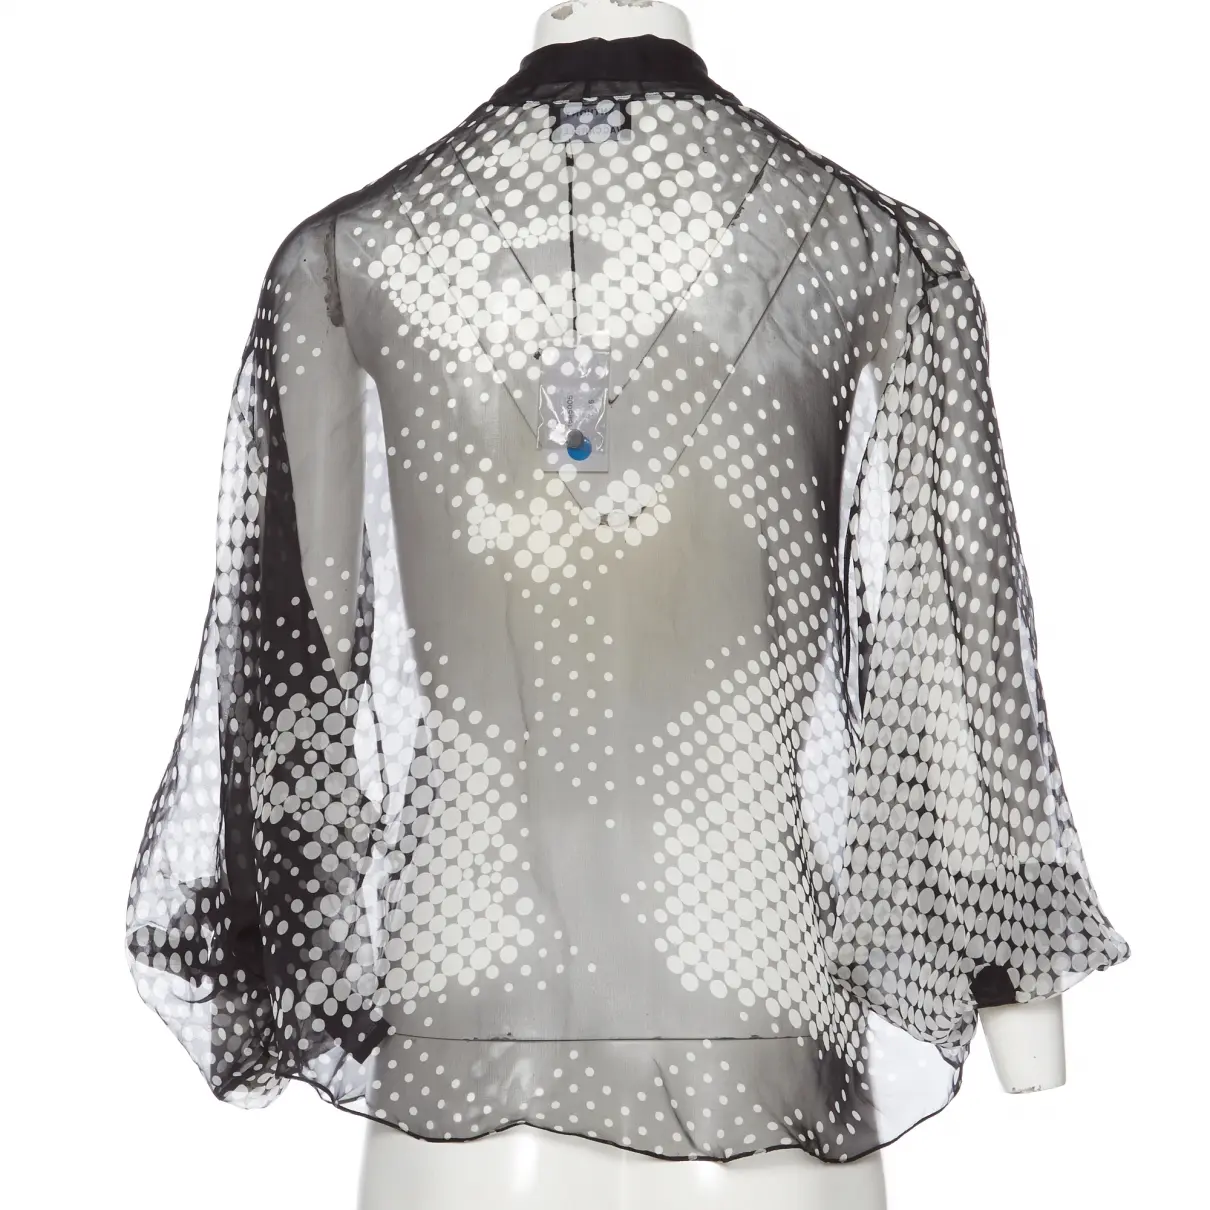 Anthony Vaccarello Silk blouse for sale